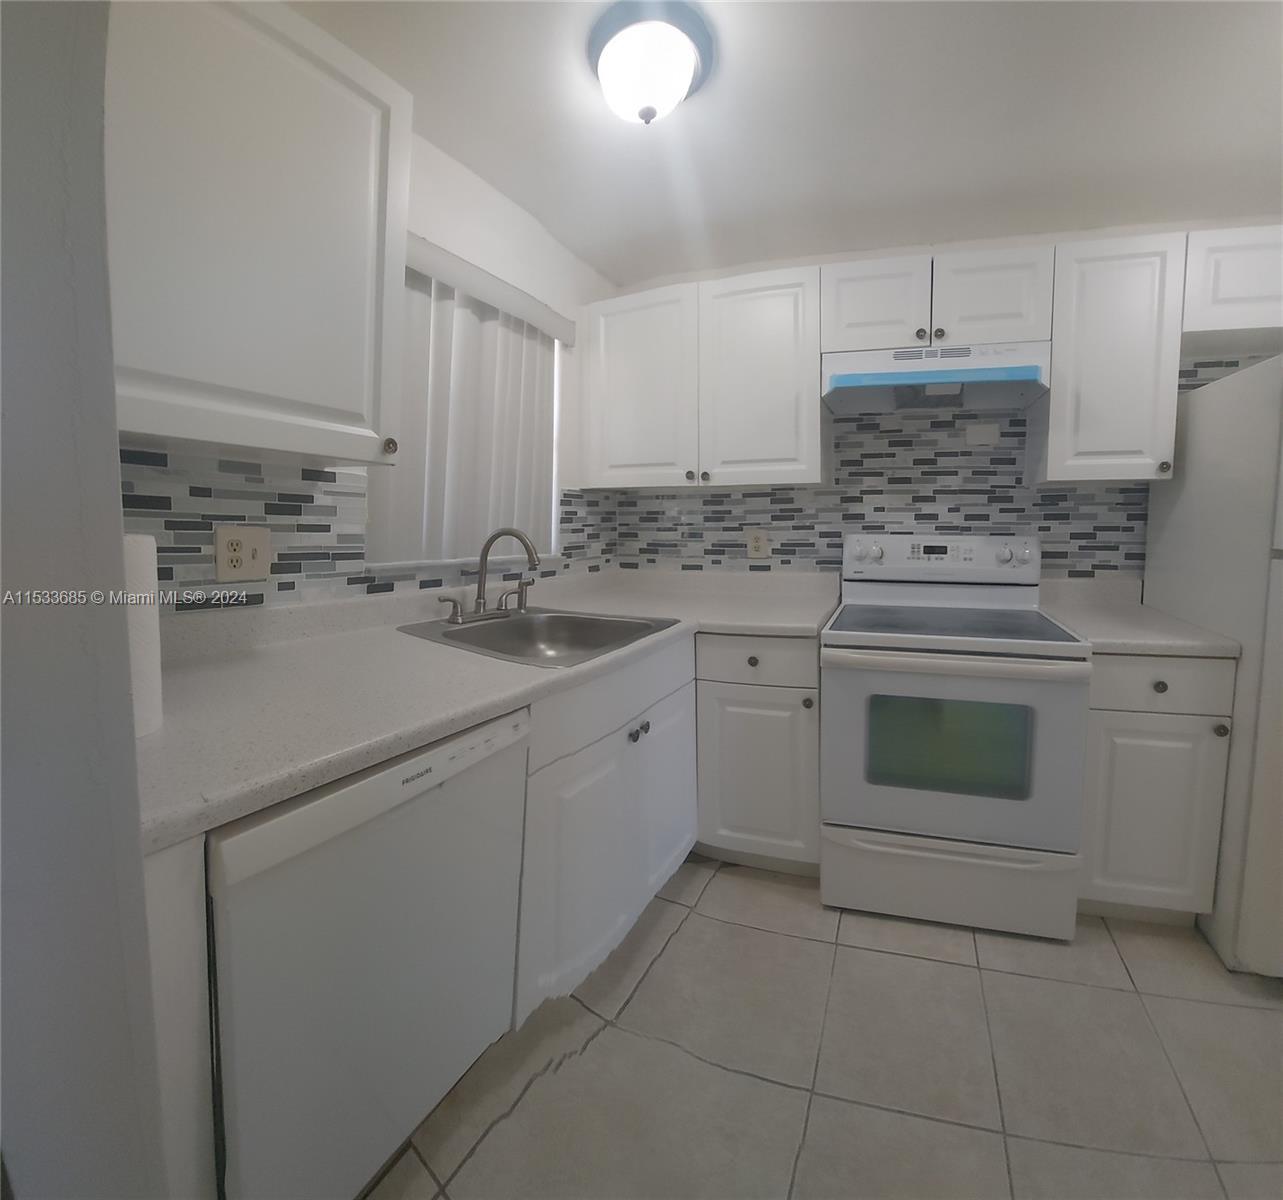 2600 W Sunrise Lakes Dr 210, Sunrise, Florida 33322, 2 Bedrooms Bedrooms, ,2 BathroomsBathrooms,Residential,For Sale,2600 W Sunrise Lakes Dr 210,A11533685